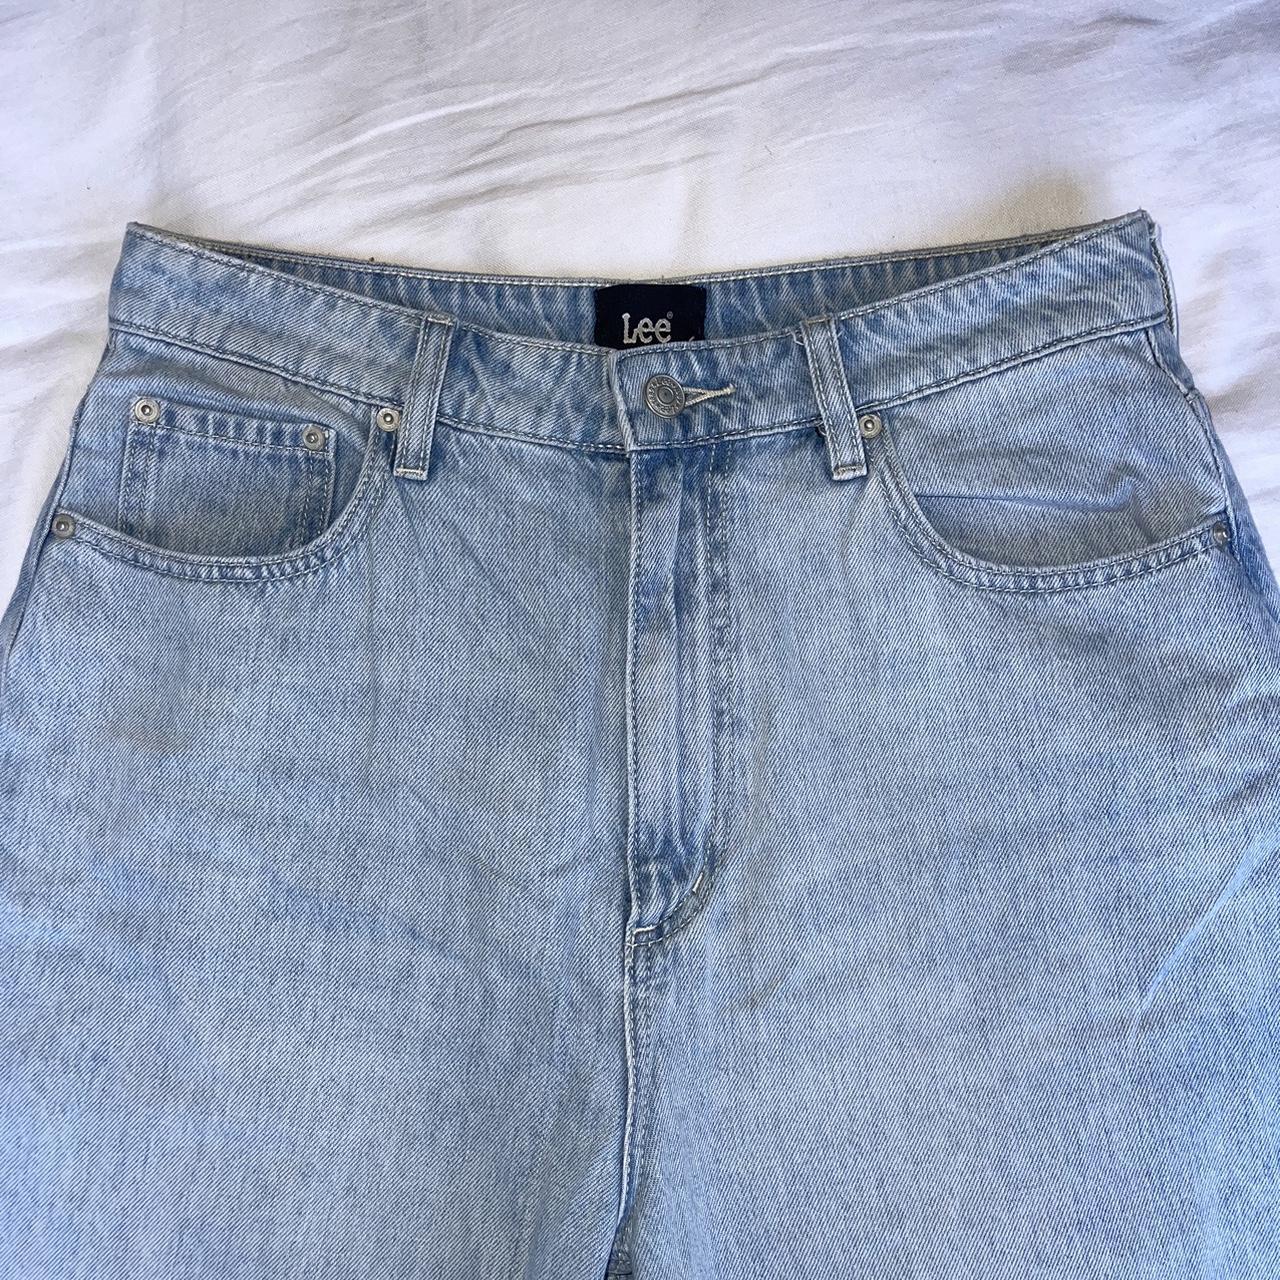 Lee jeans (high baggy) brought one size too big/worn... - Depop